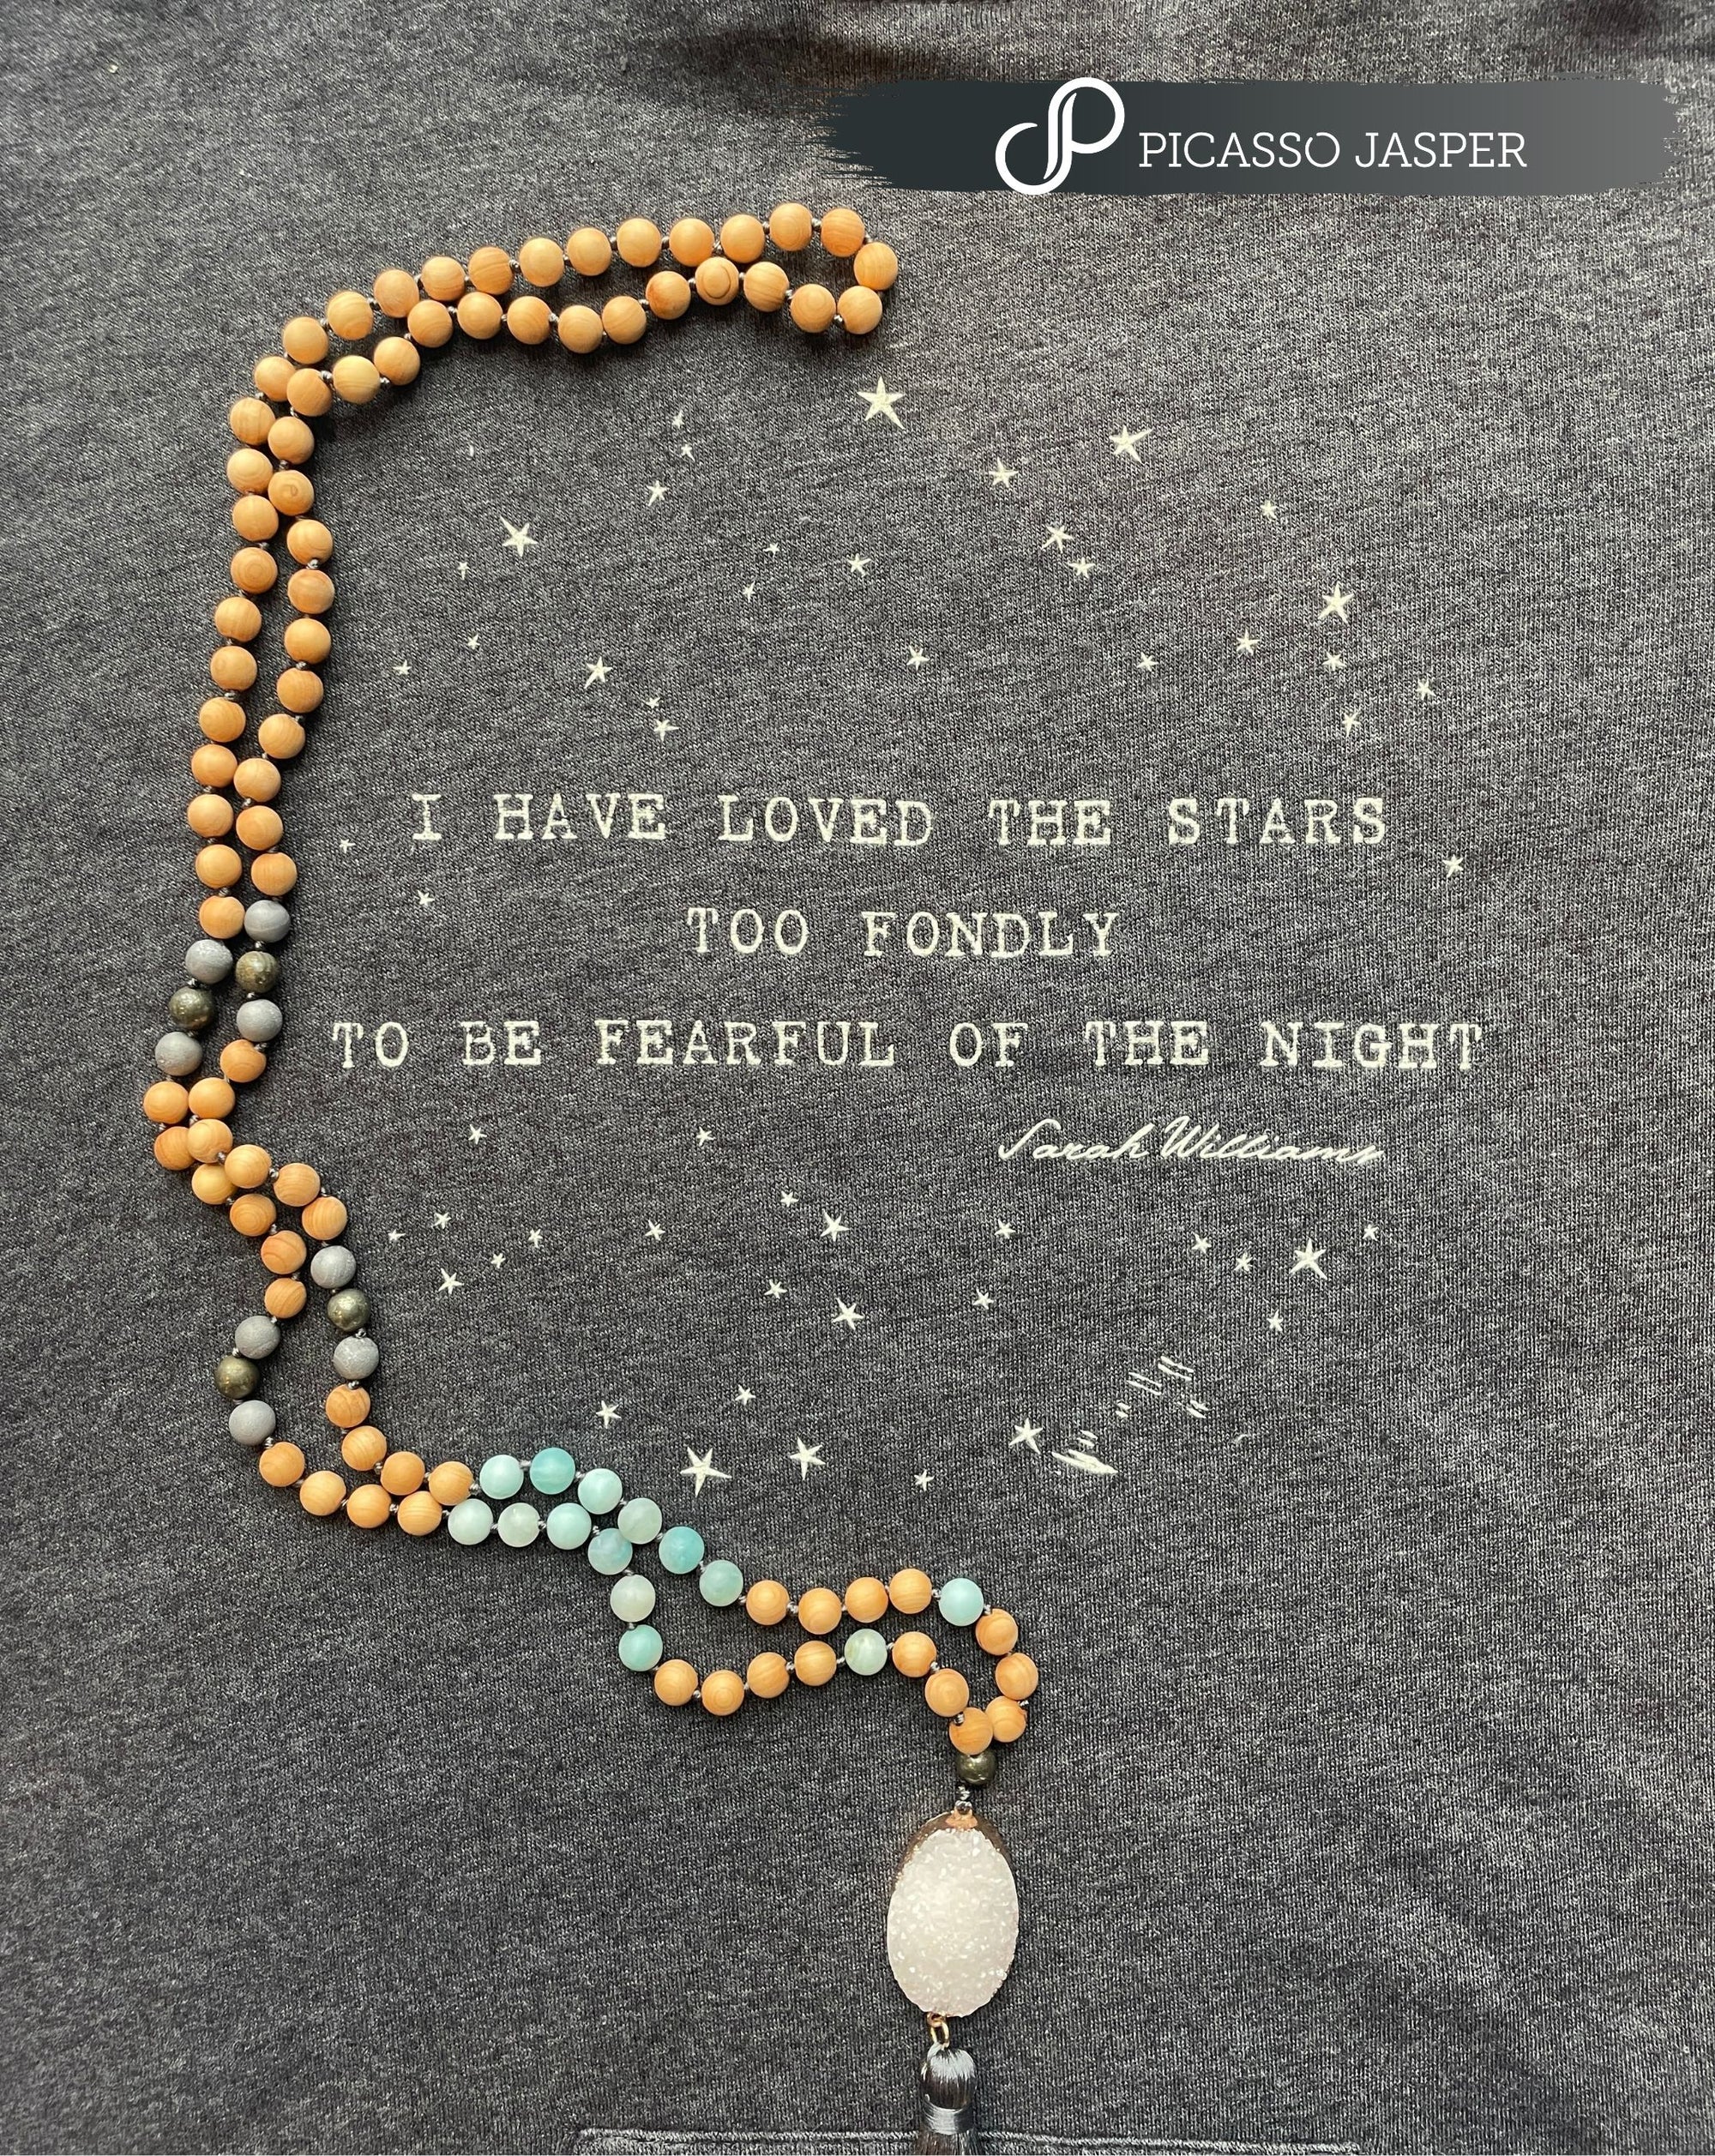 I Have Loved the Stars to Fondly, Sweatshirt Dress